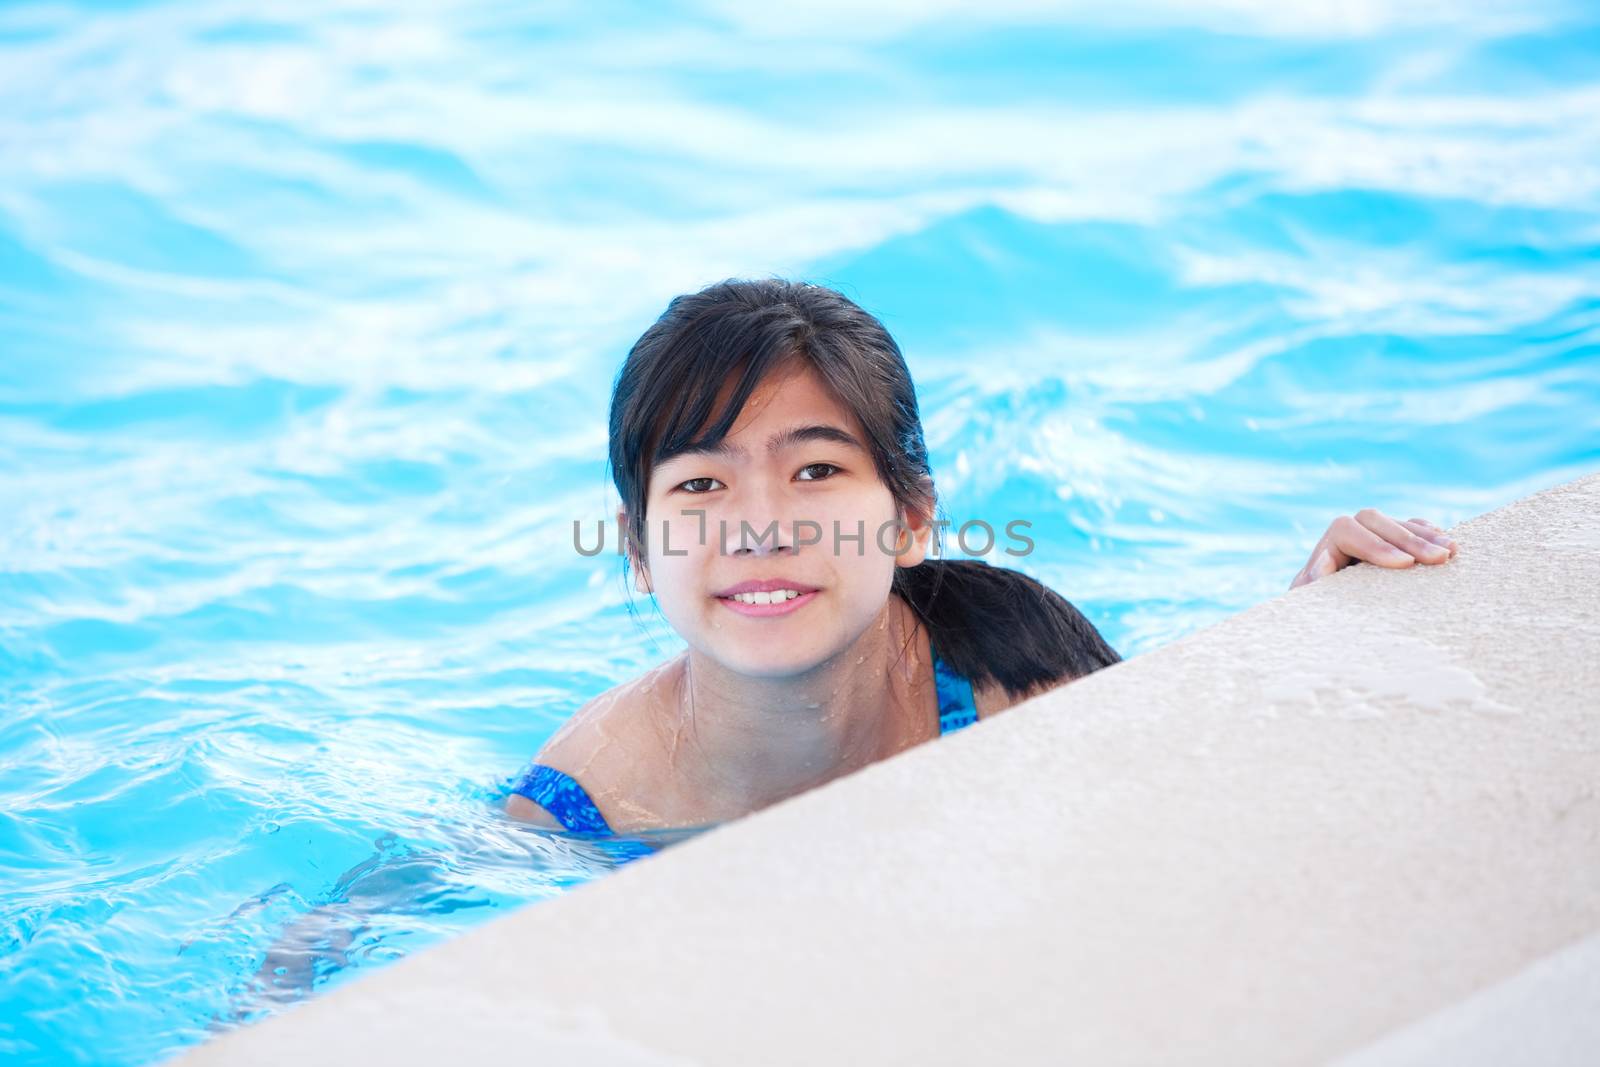 Young teen girl relaxing in pool, smiling at camera by jarenwicklund